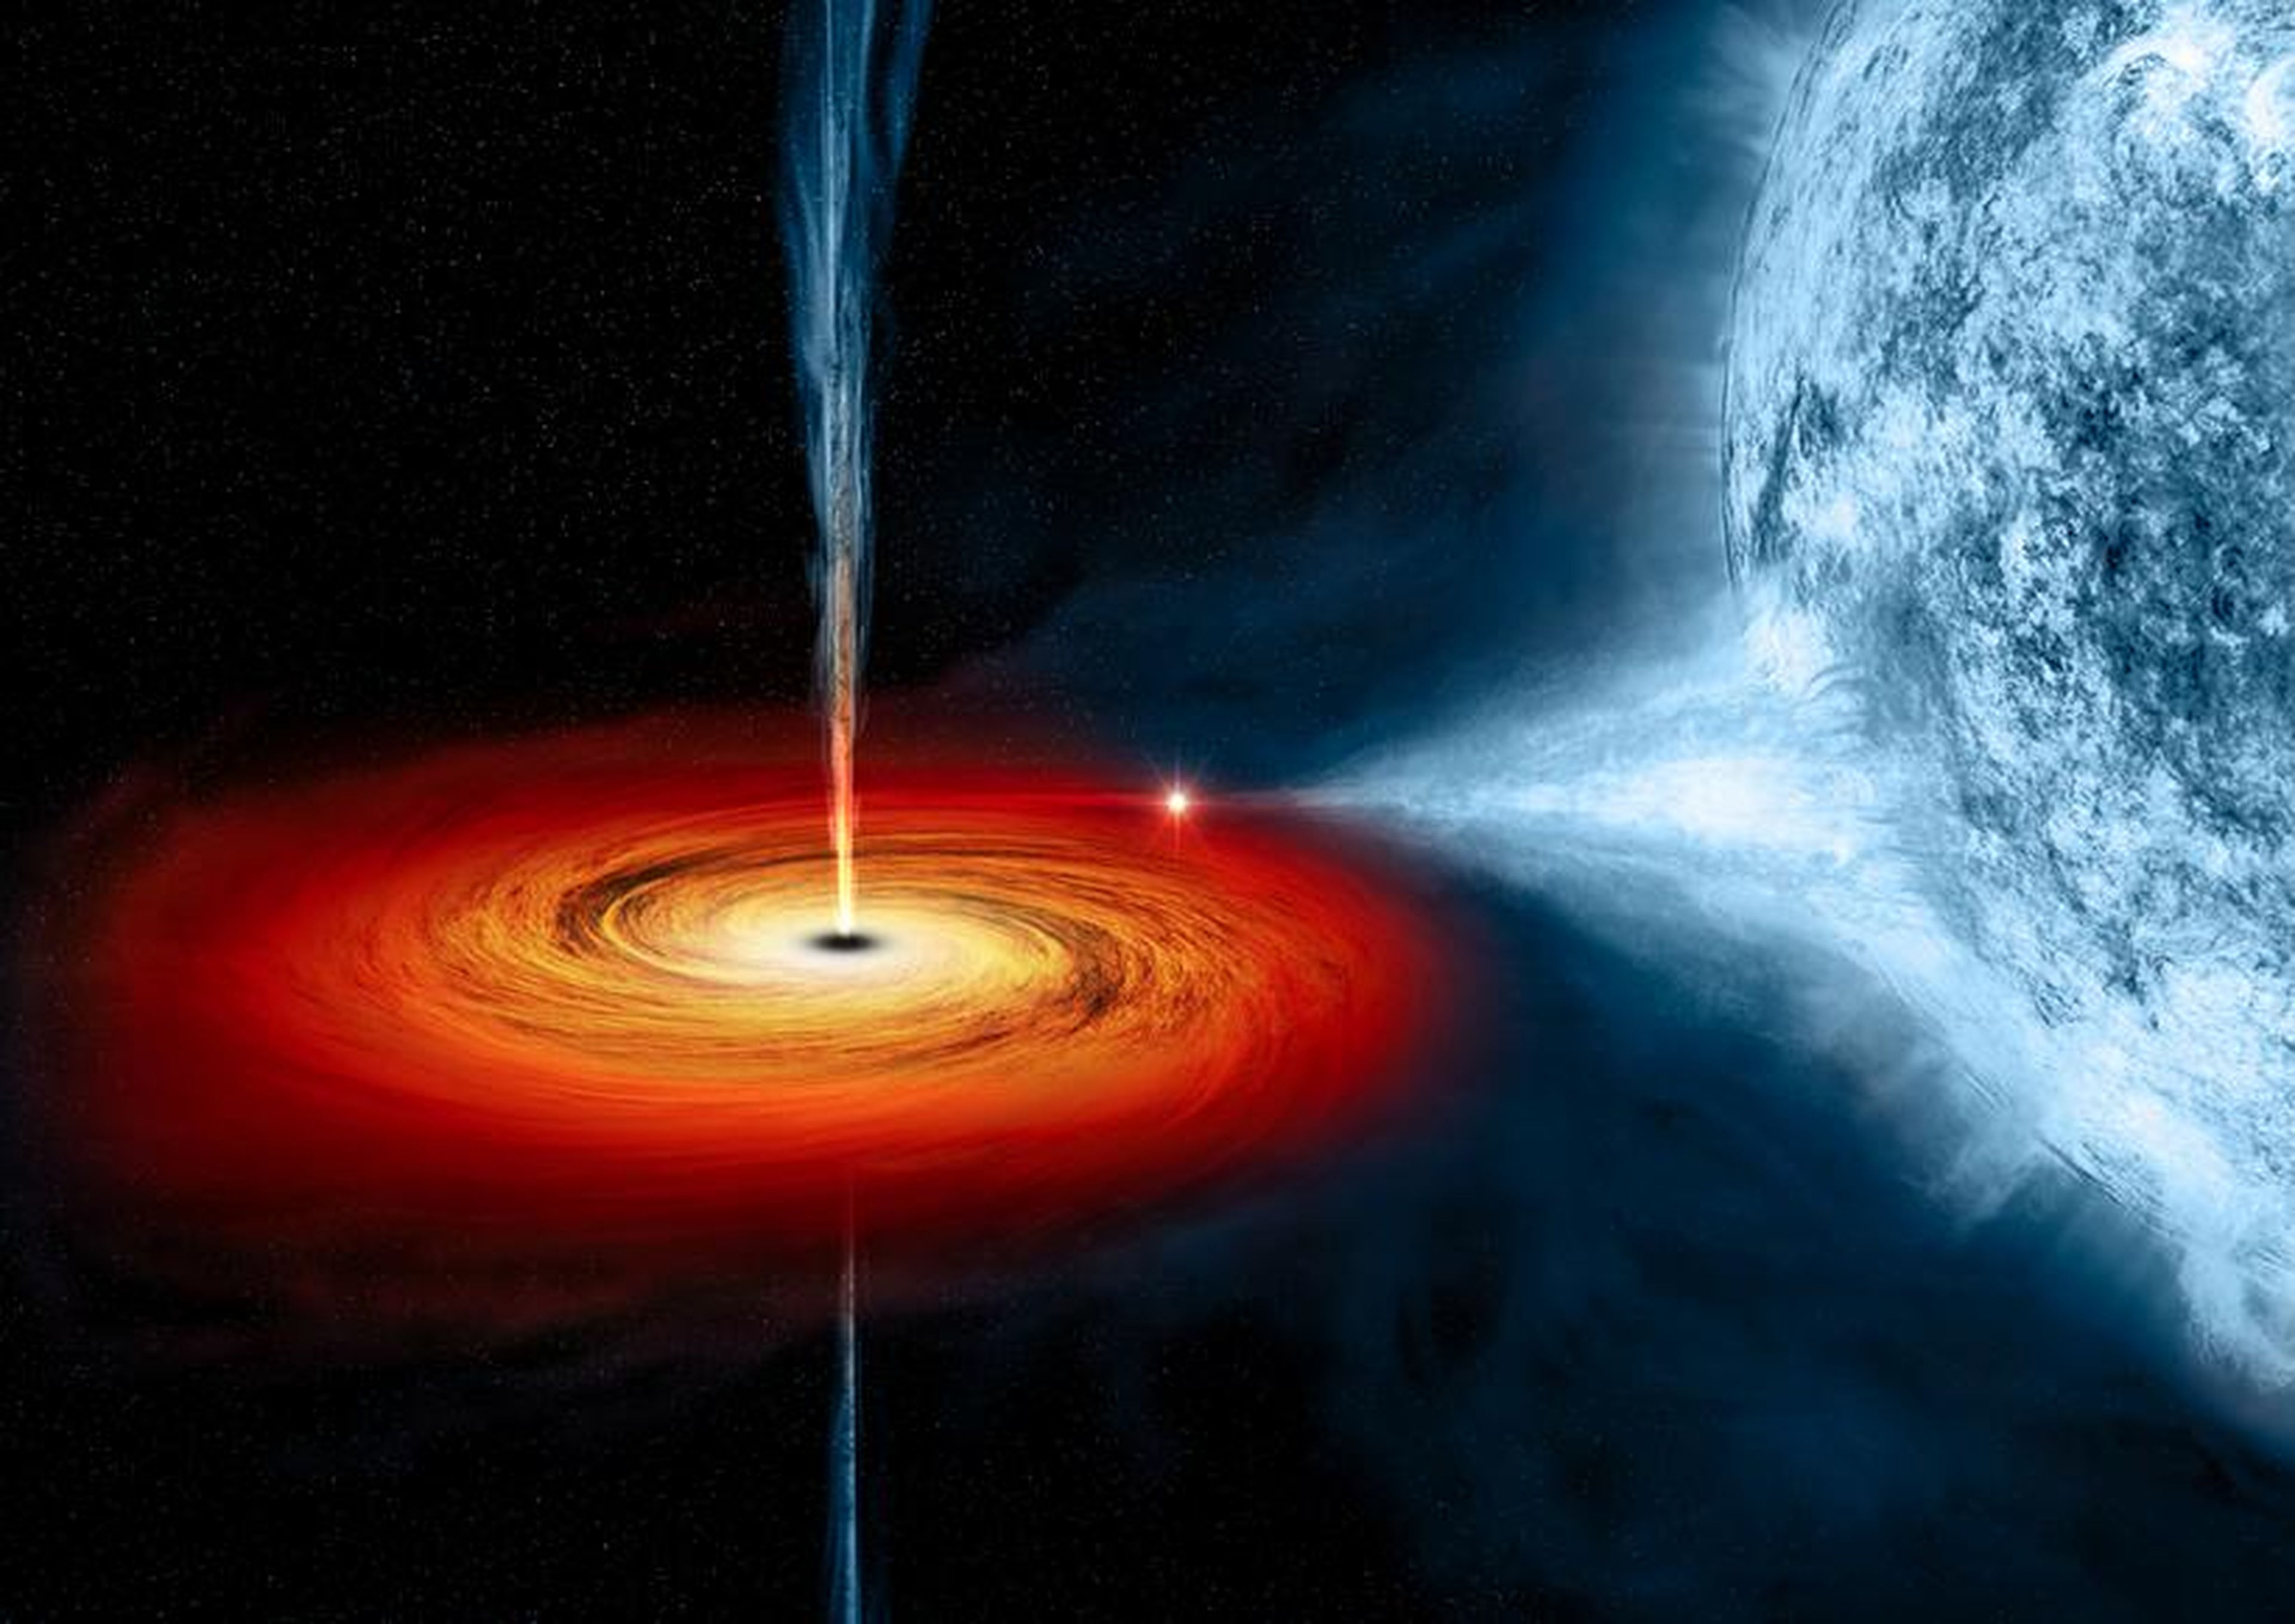 Our closest black hole won't do us any harm. It's about 26,000 light-years away from Earth.